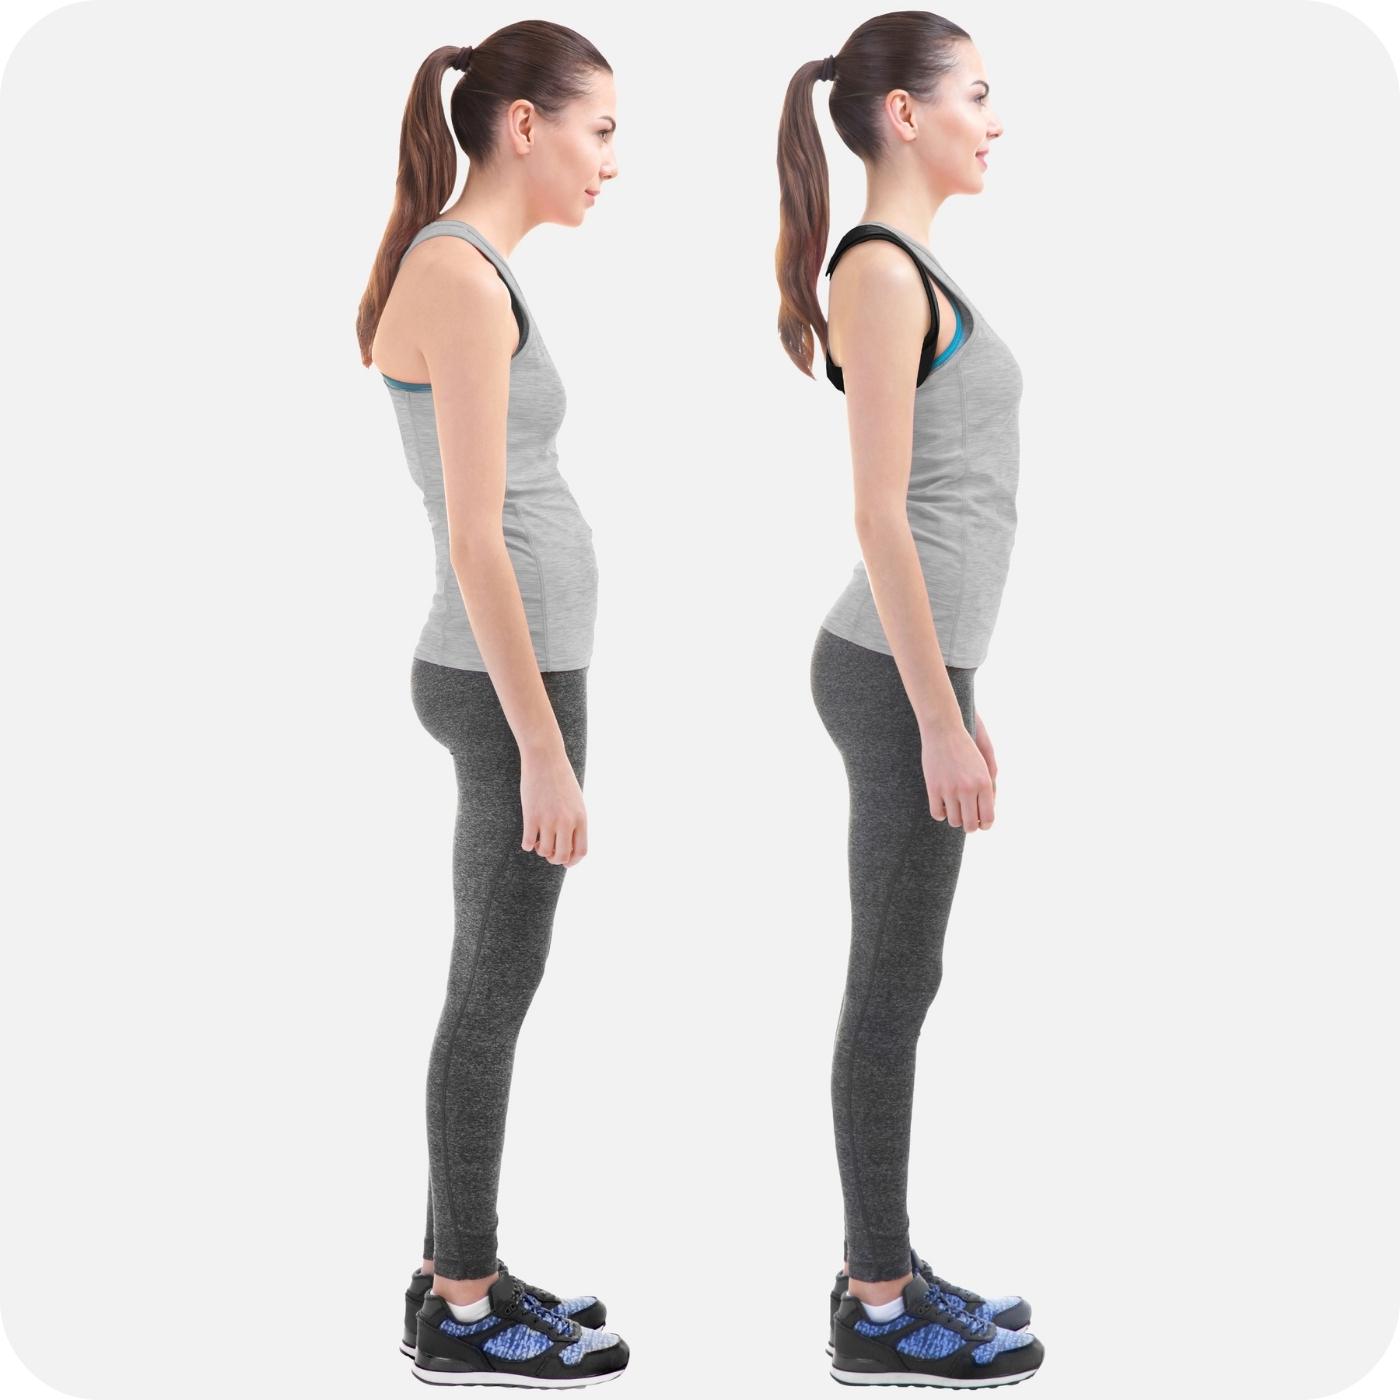 woman standing before and after using her 3dactive posture corrector